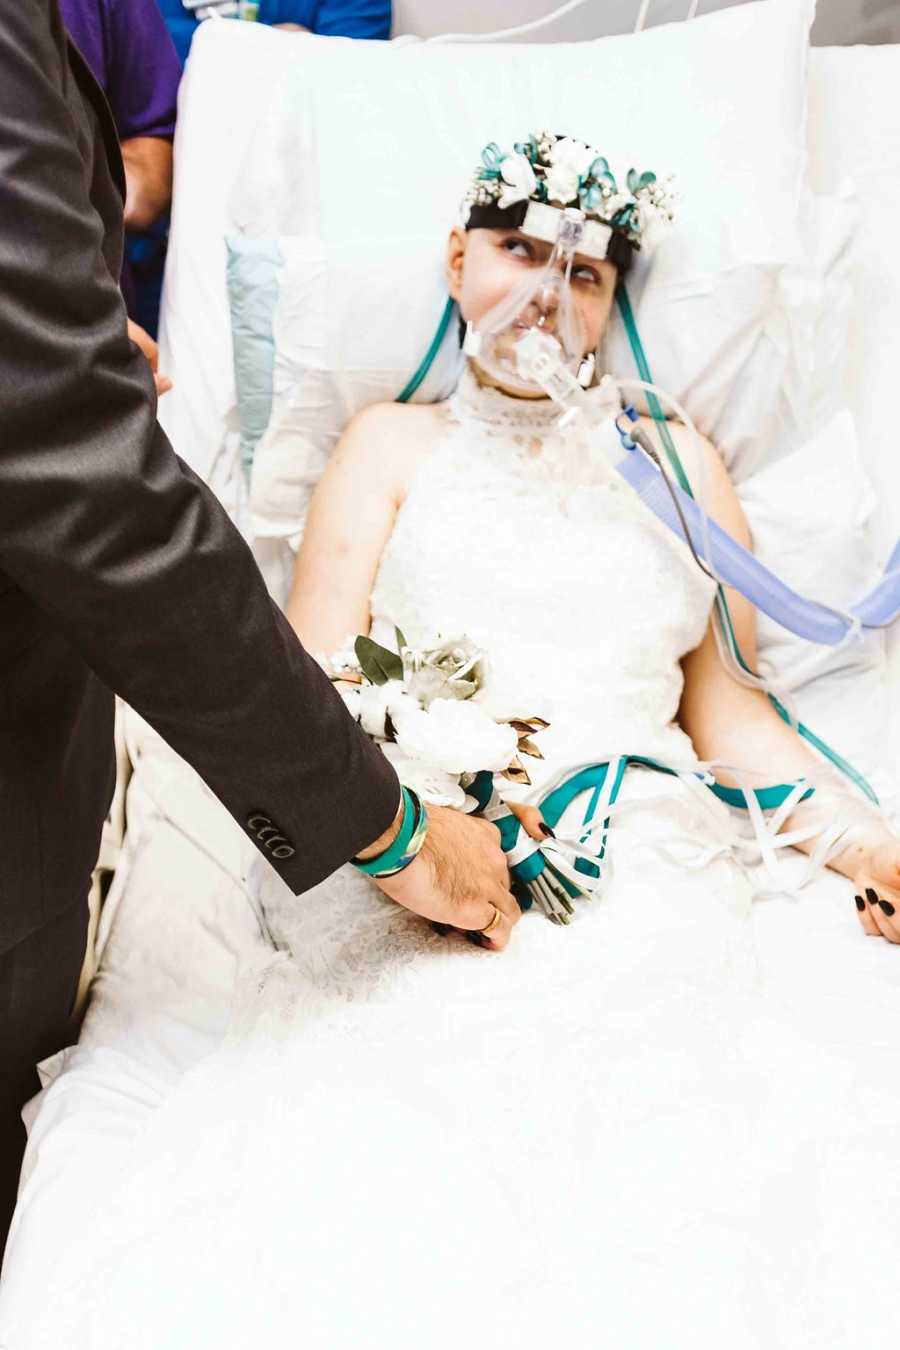 Teen bride with cancer sits in hospital in wedding gown looking up at groom